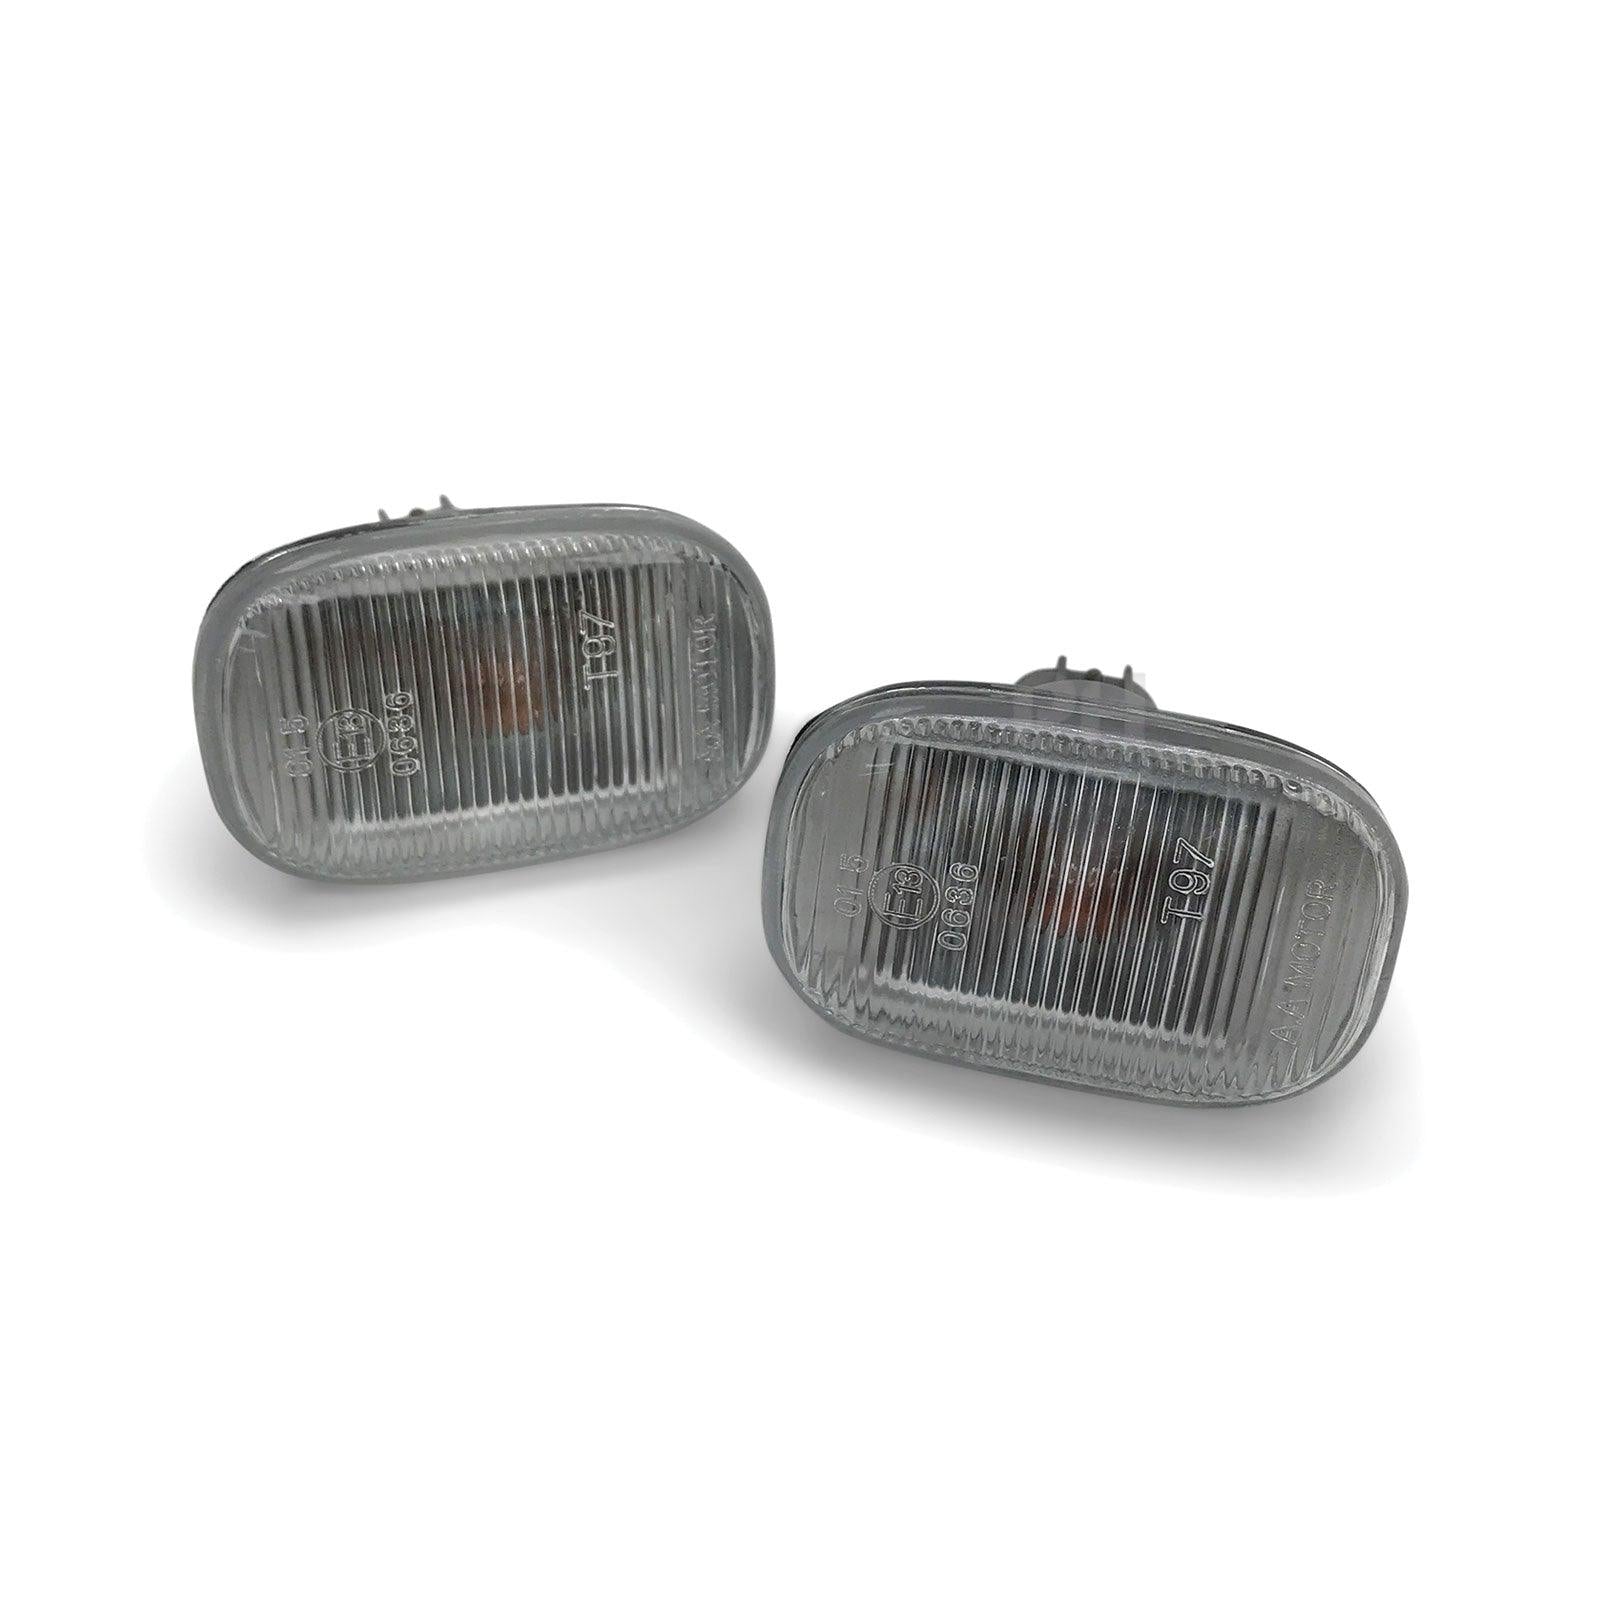 Indicator Guard Repeater Light Flasher PAIR With Bulbs Fits Toyota Hilux 05-14 - 4X4OC™